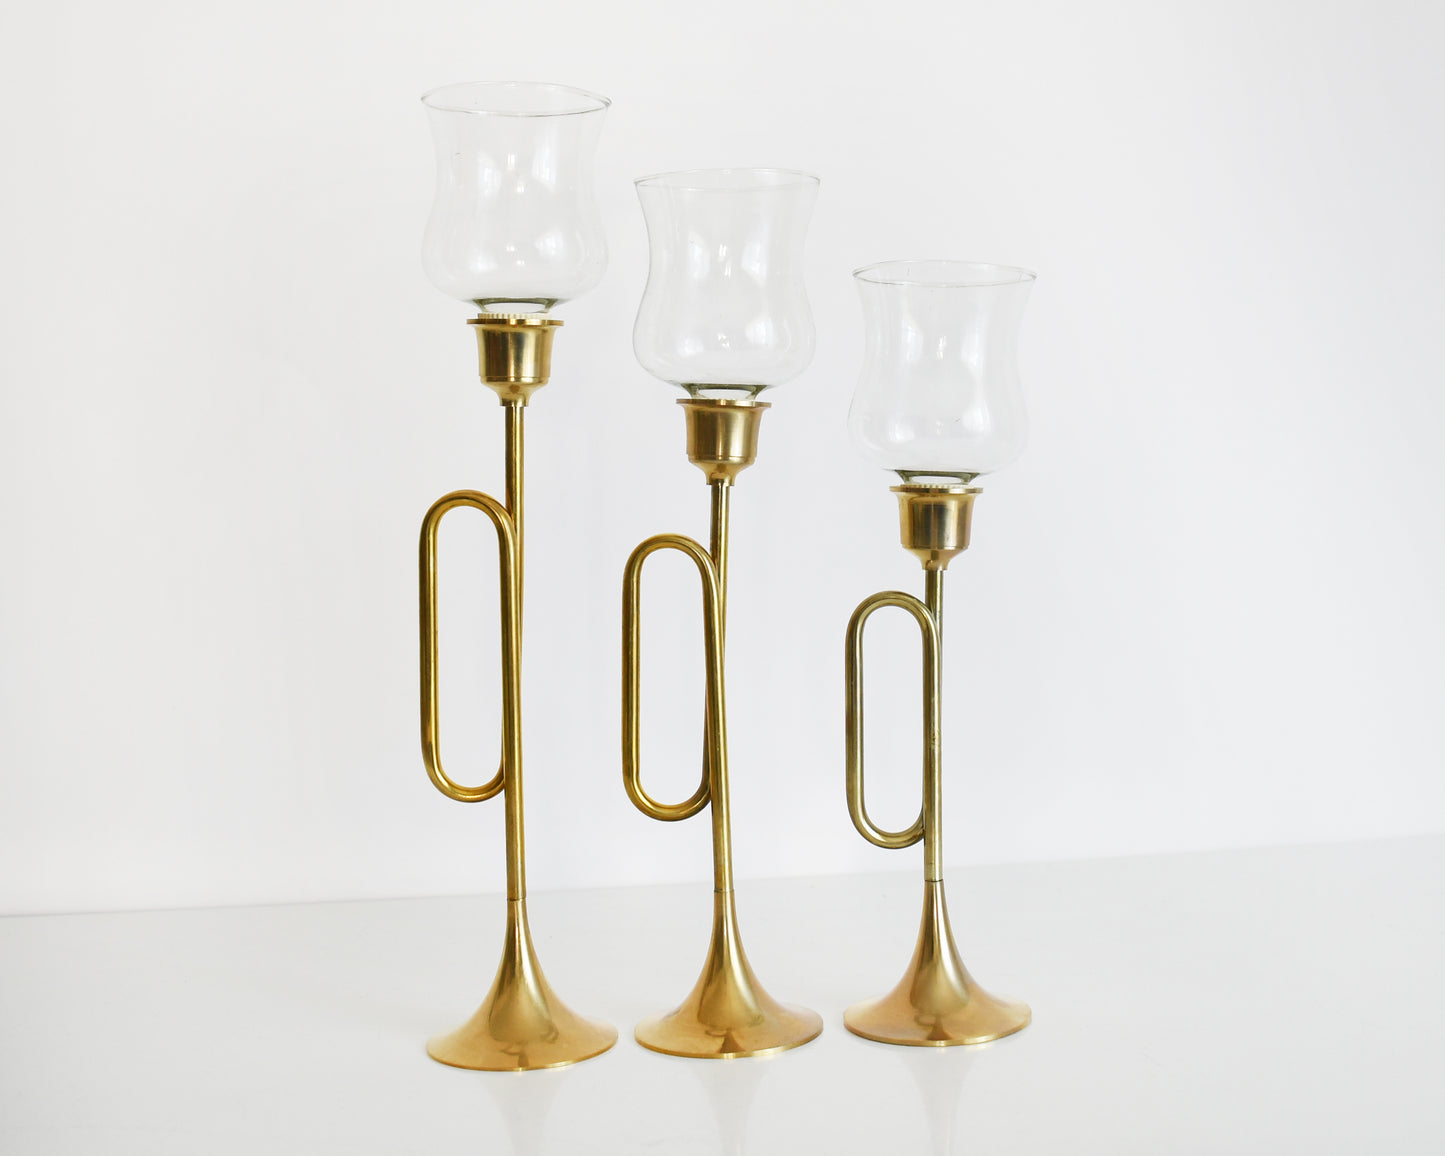 Three vintage brass bugle/horn candlesticks that has clear class votives on top.